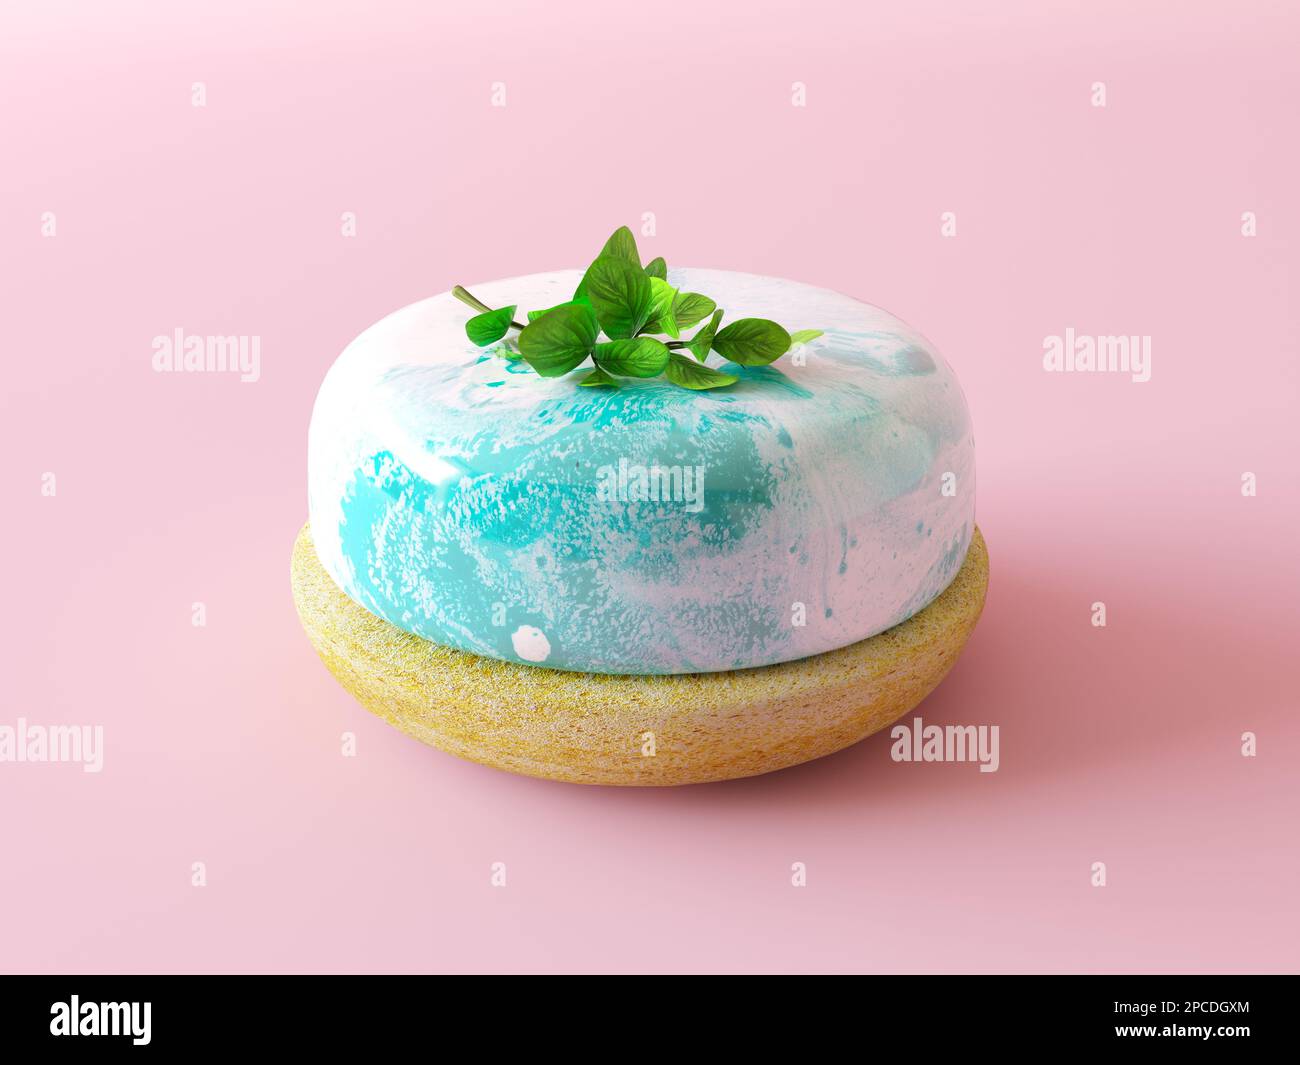 Trendy mint mousse cake with white and blue waves mirror glaze. Decorated by mint leaves. Isolated on pastel background. Stock Photo